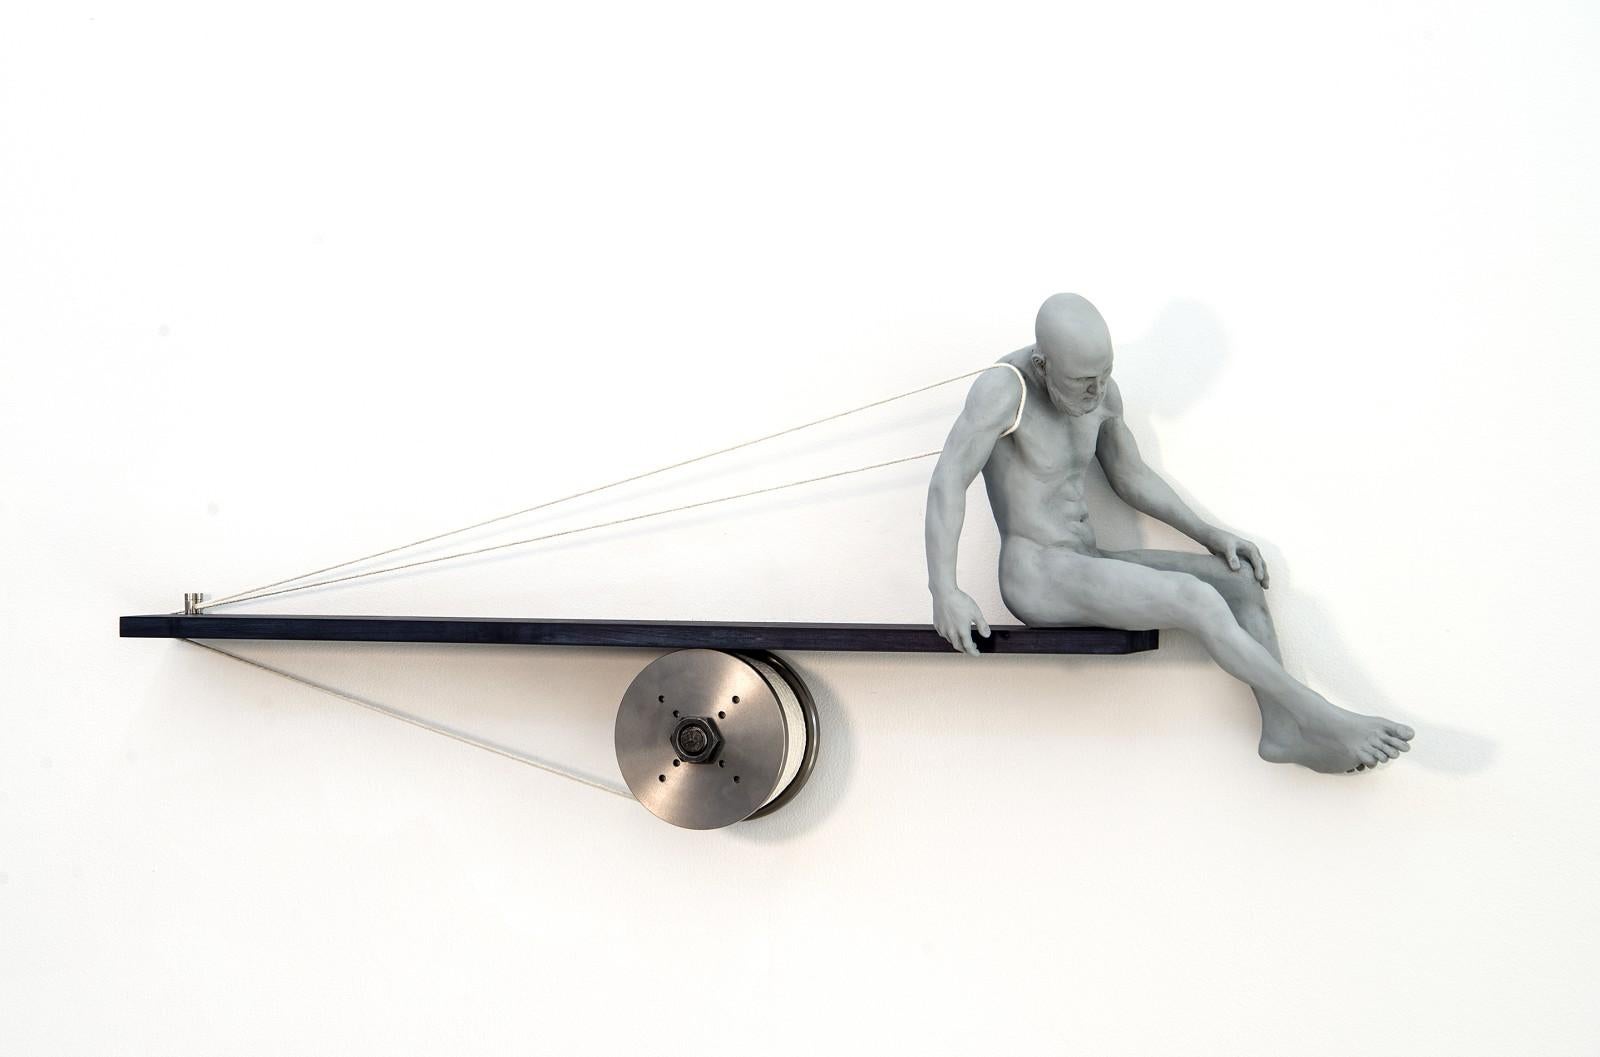 Tethered 1/9 - poised, male, nude, figure, mixed media, wall sculpture - Brown Figurative Sculpture by W.W. Hung